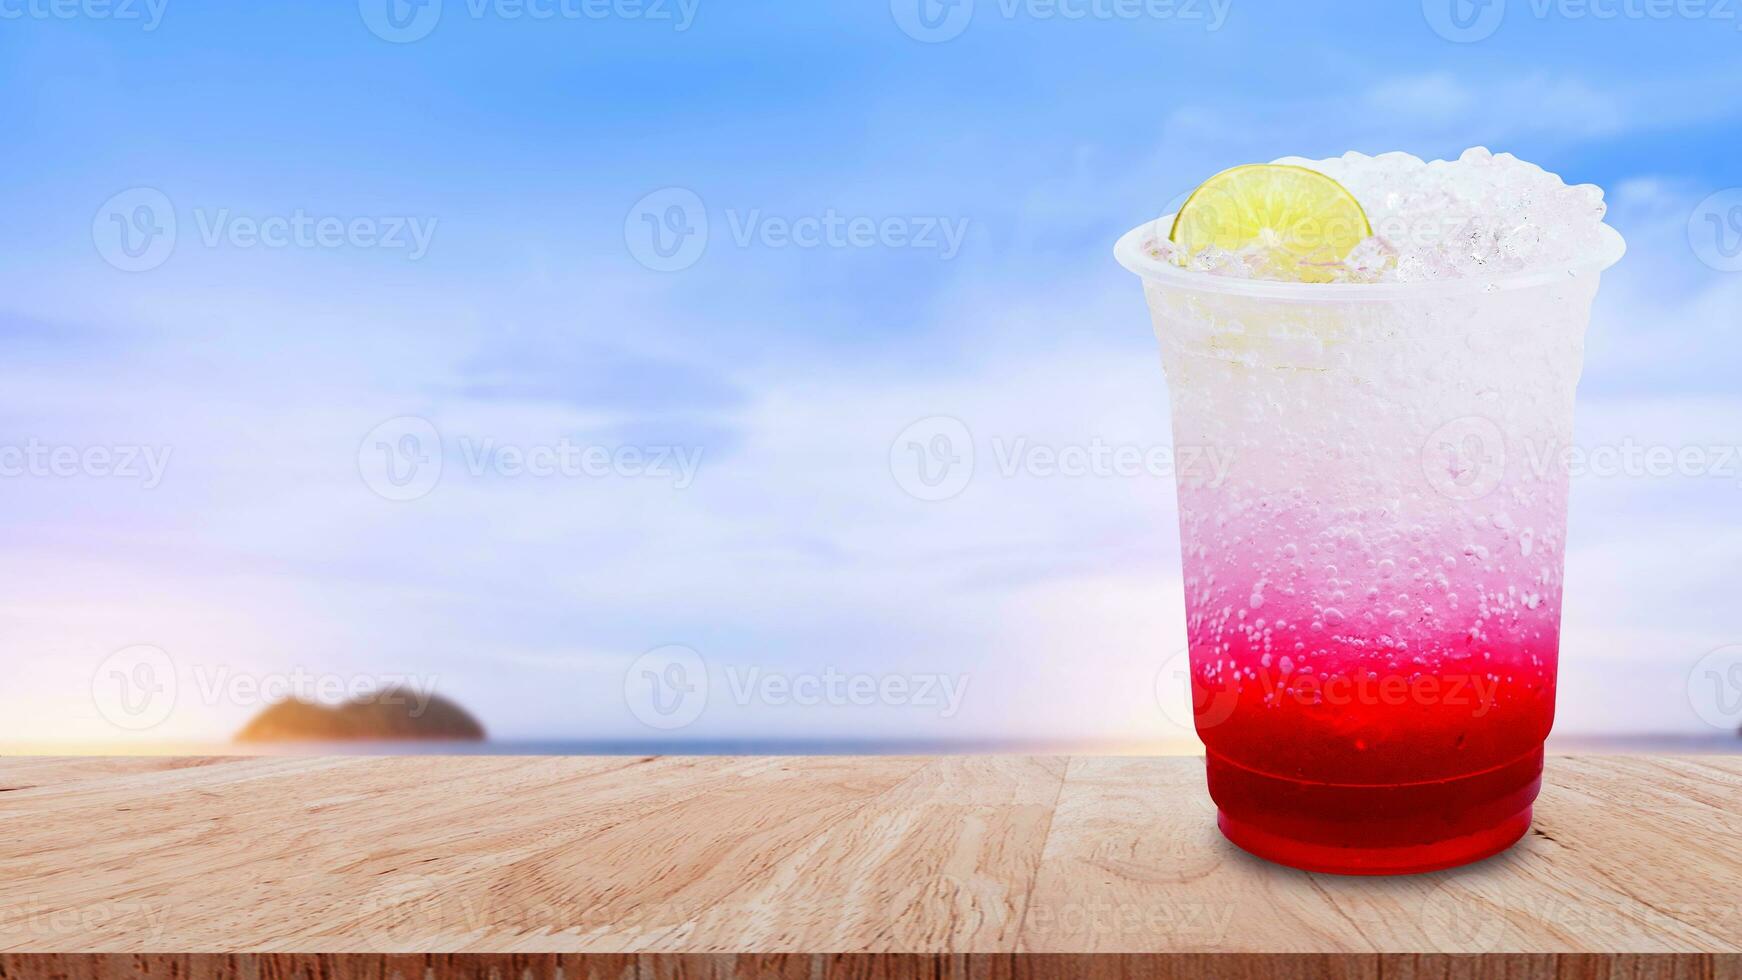 Italian soda made from fruit syrup drink mix in plastic cup on wooden table. Lemon, Red cocktail summer refreshment drink, Summer drinks with ice photo